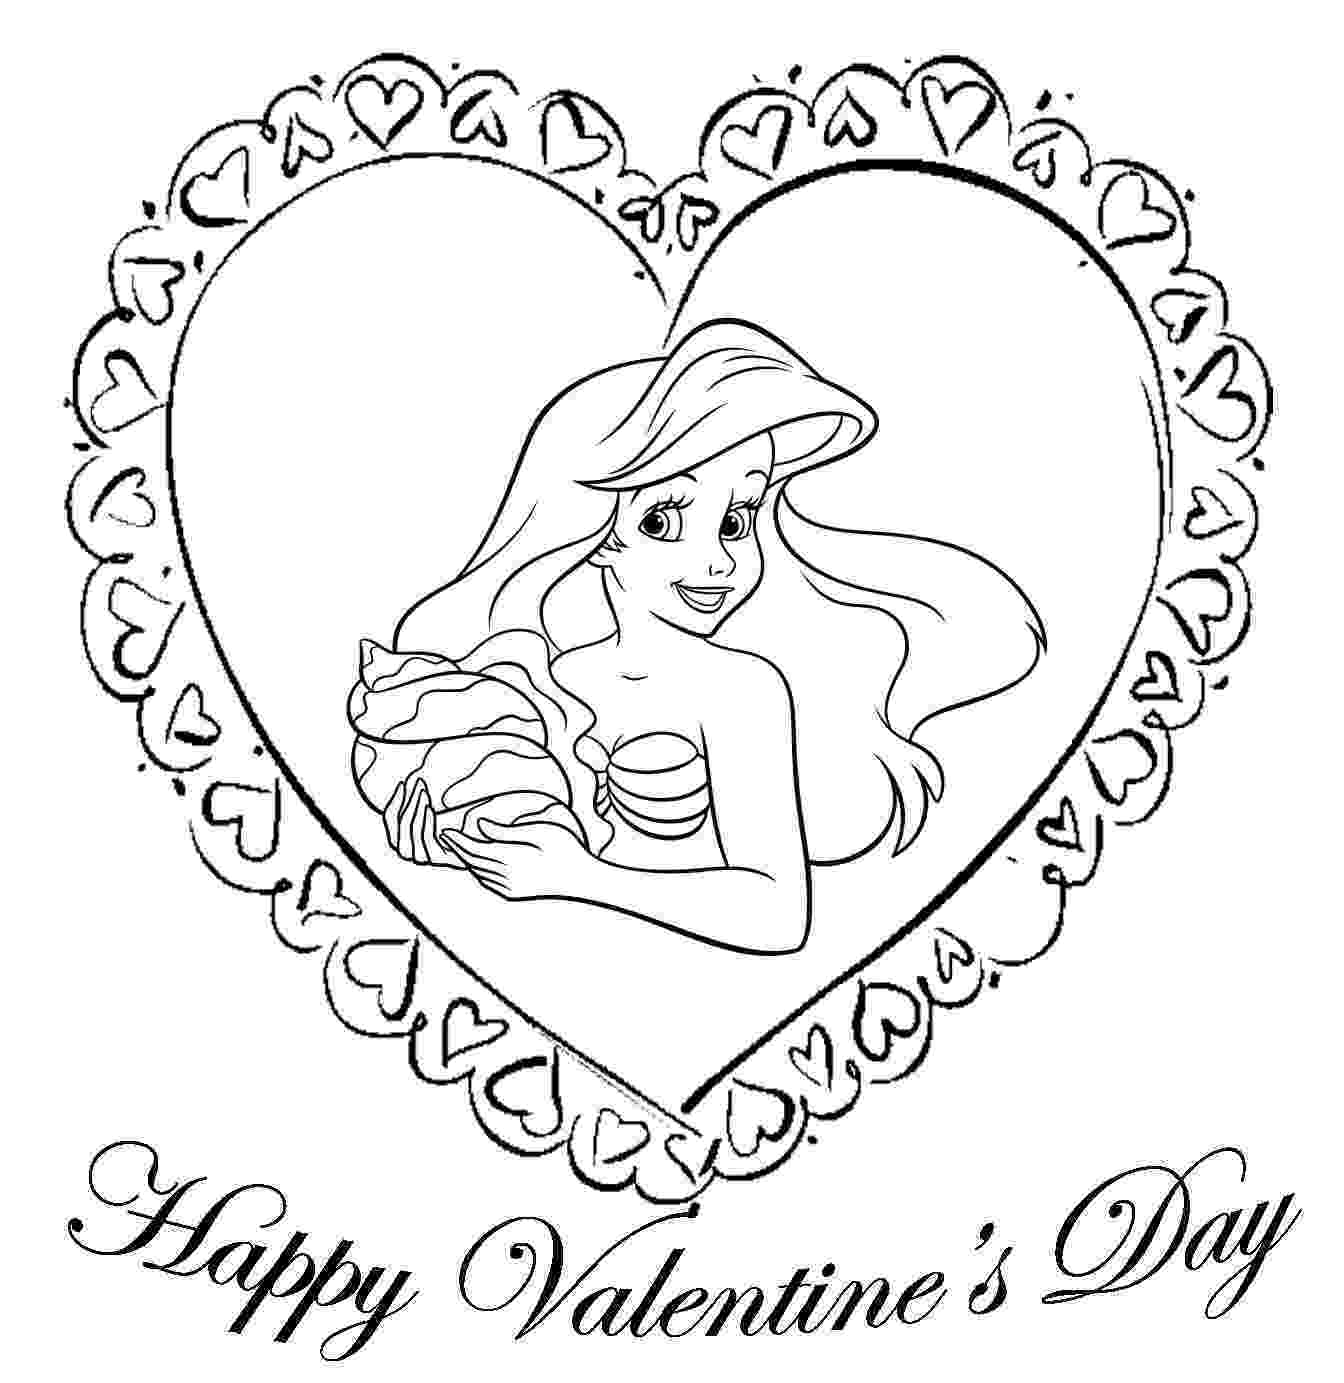 free ariel coloring pages ariel coloring pages to download and print for free pages ariel free coloring 